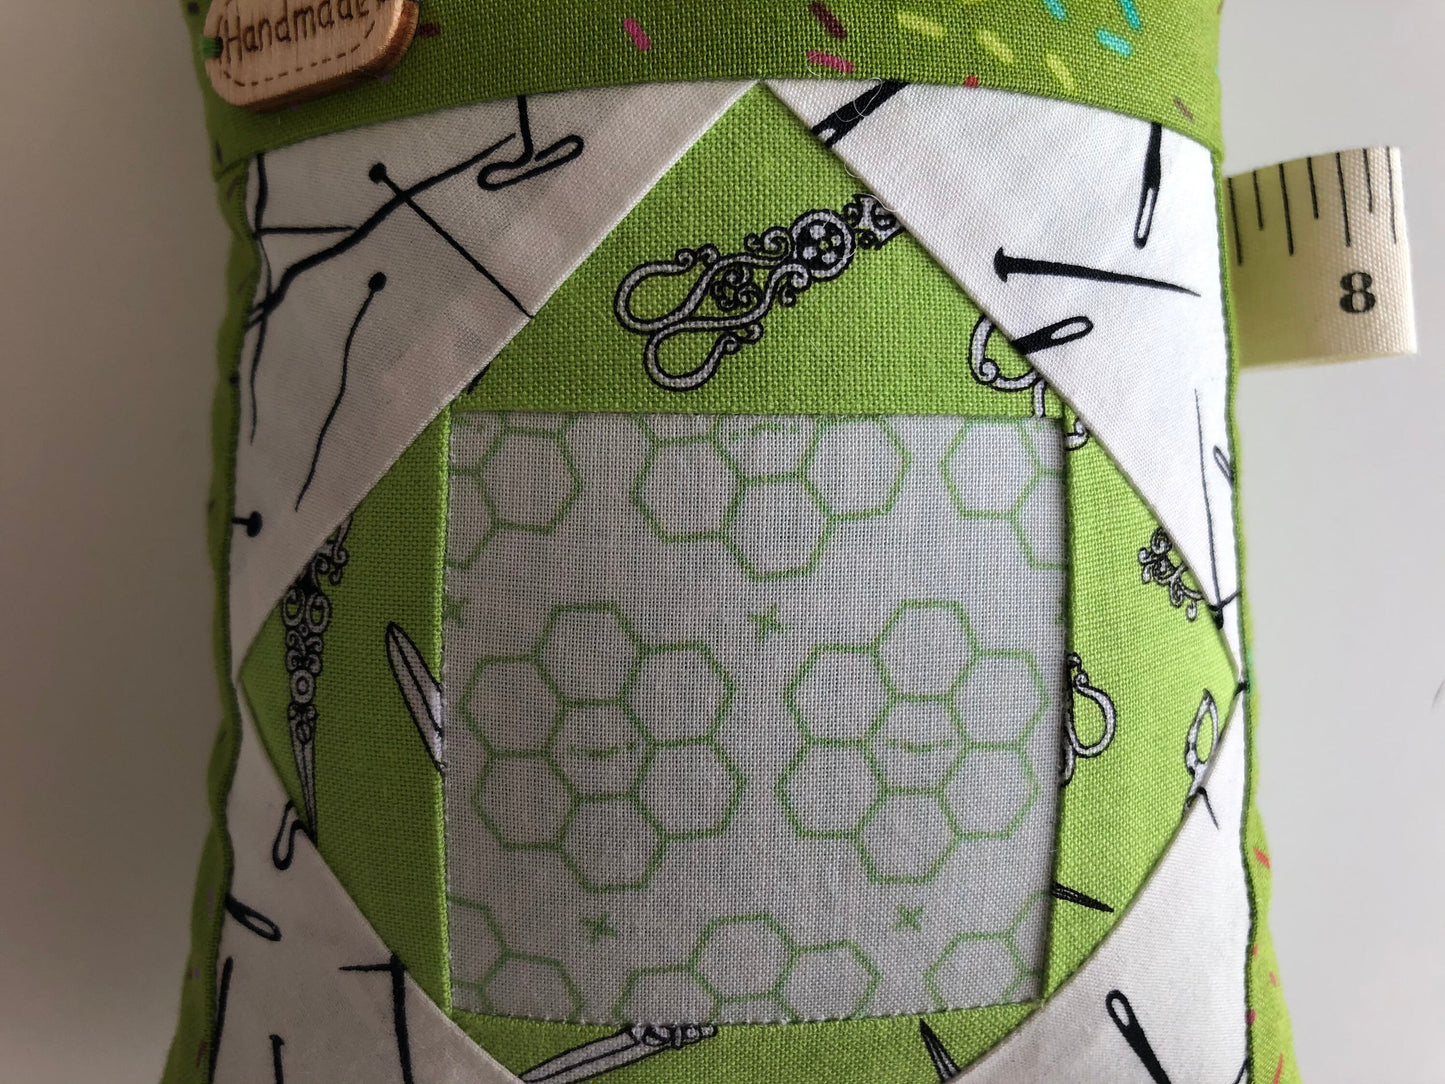 Sewing Themed Deluxe Pincushion Green